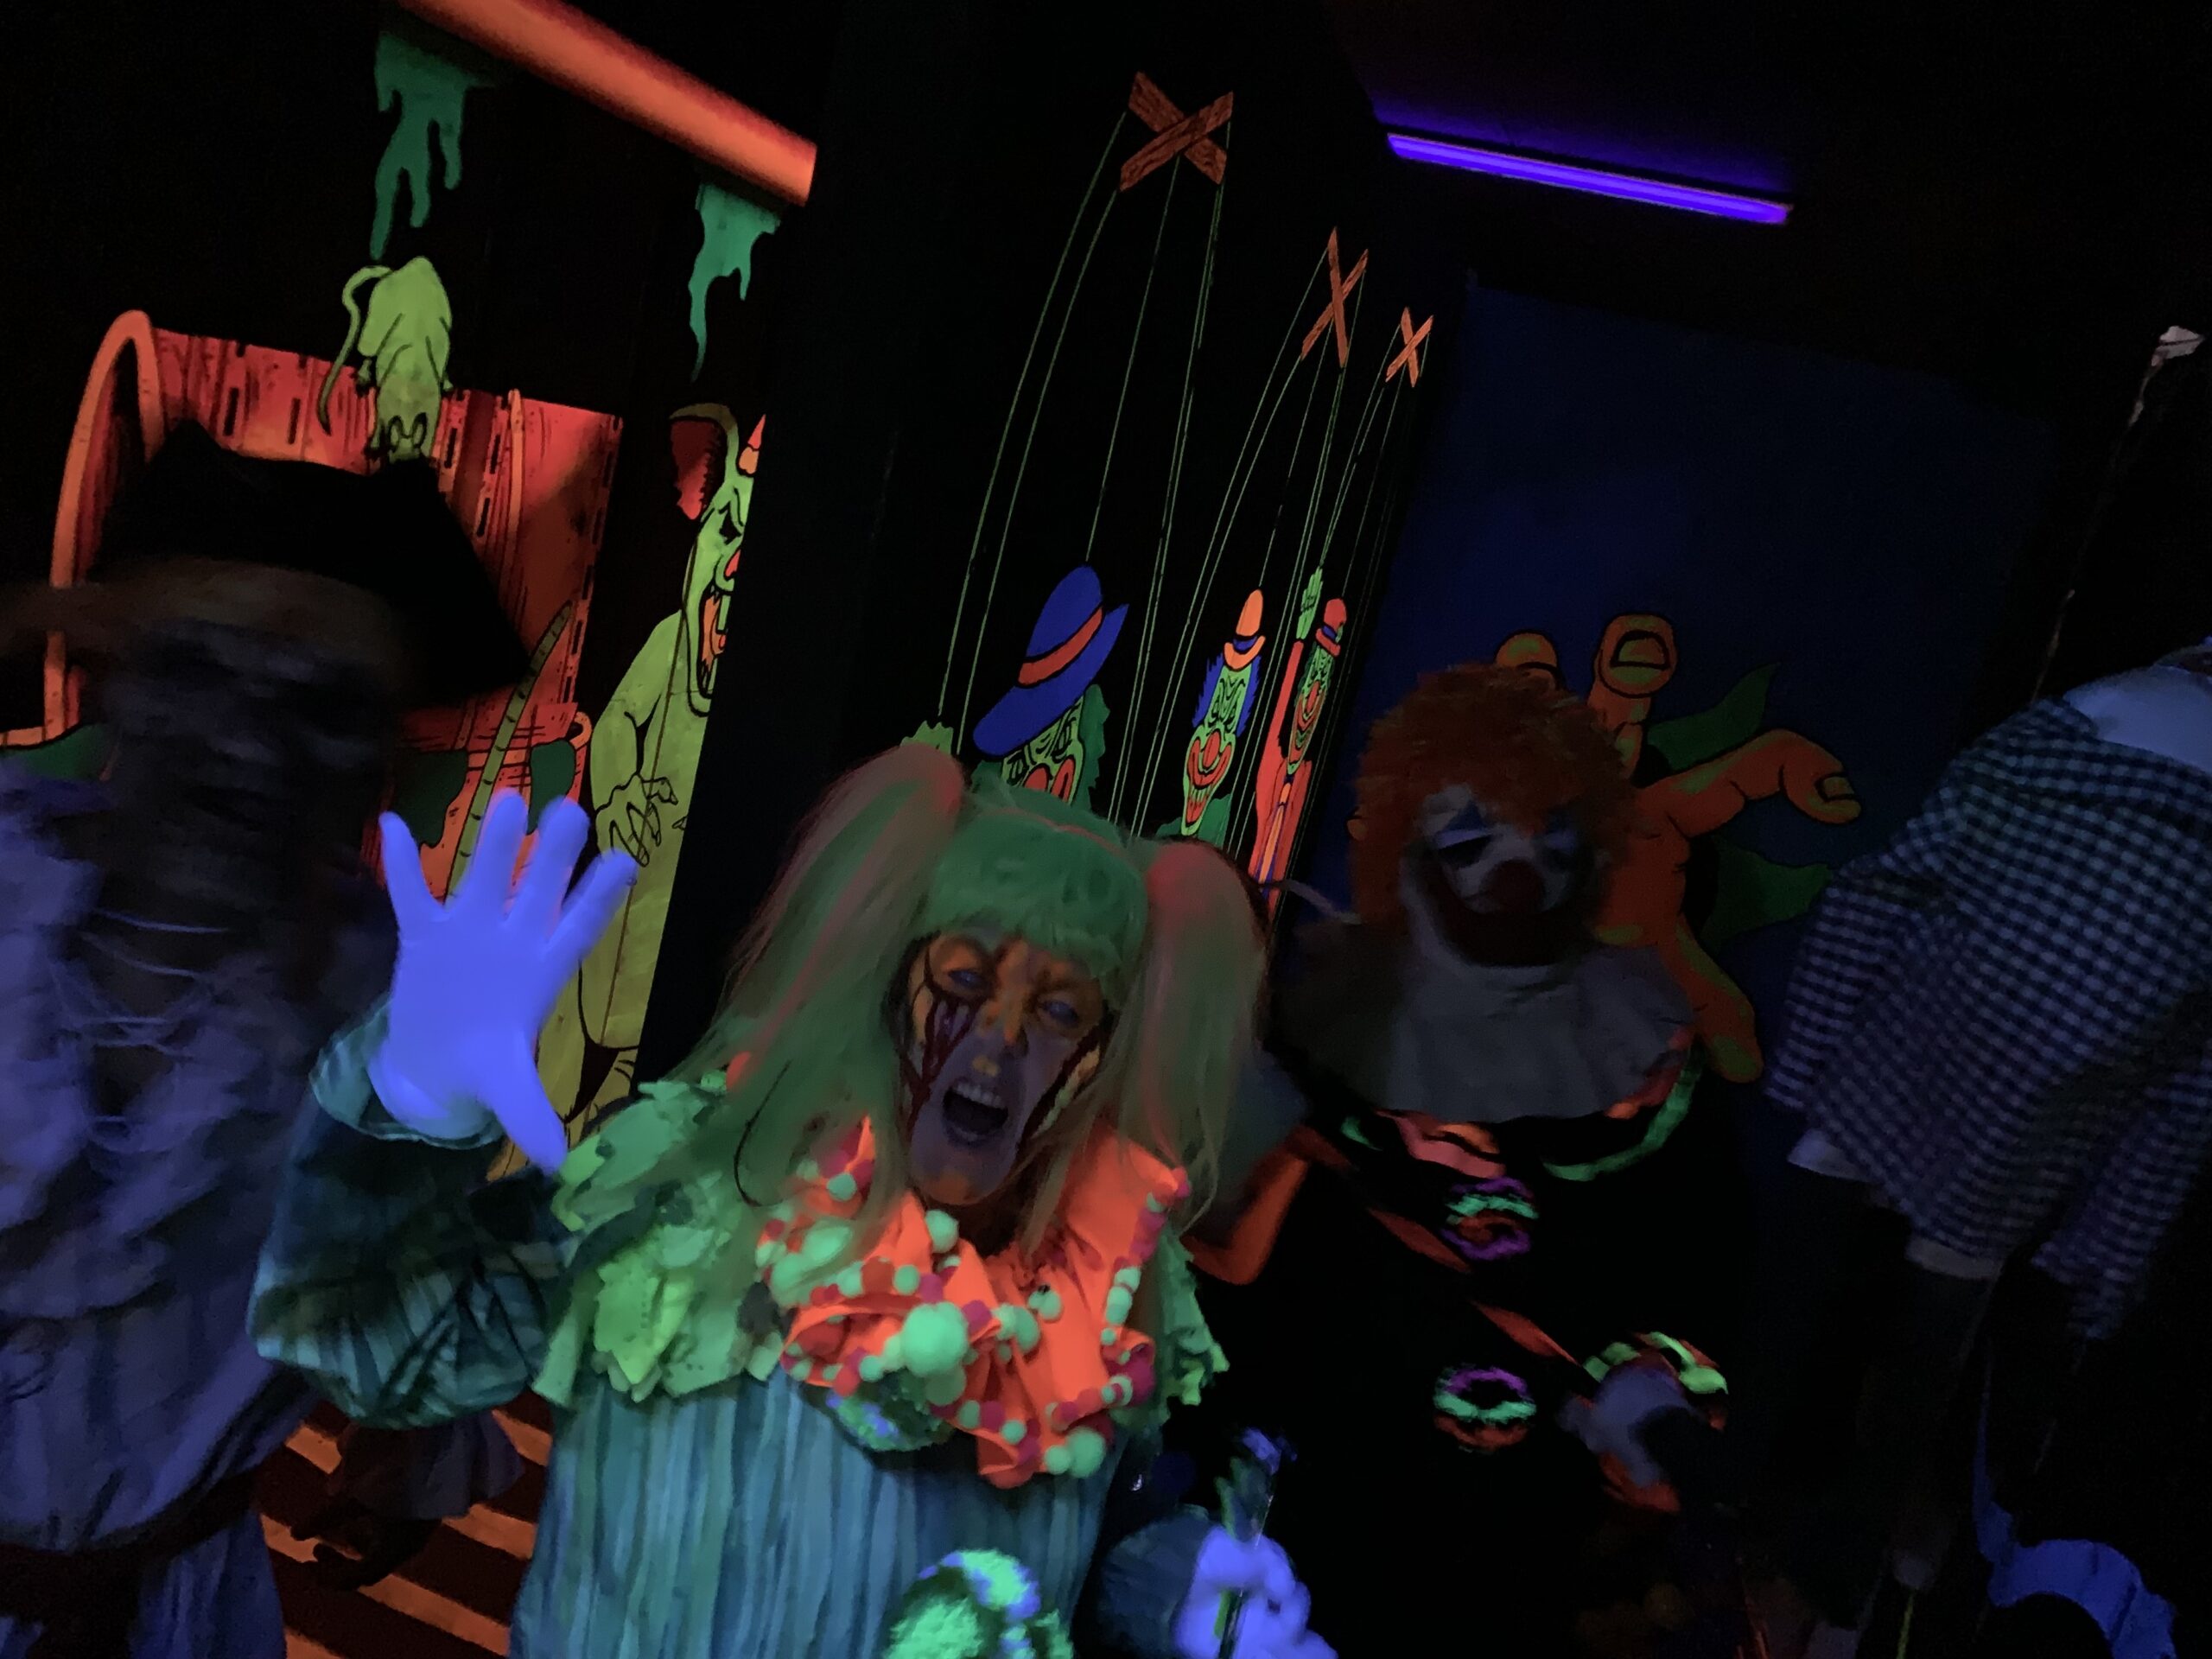 Neon Clown Character in Haunted Attraction Room at Terror in the Corn